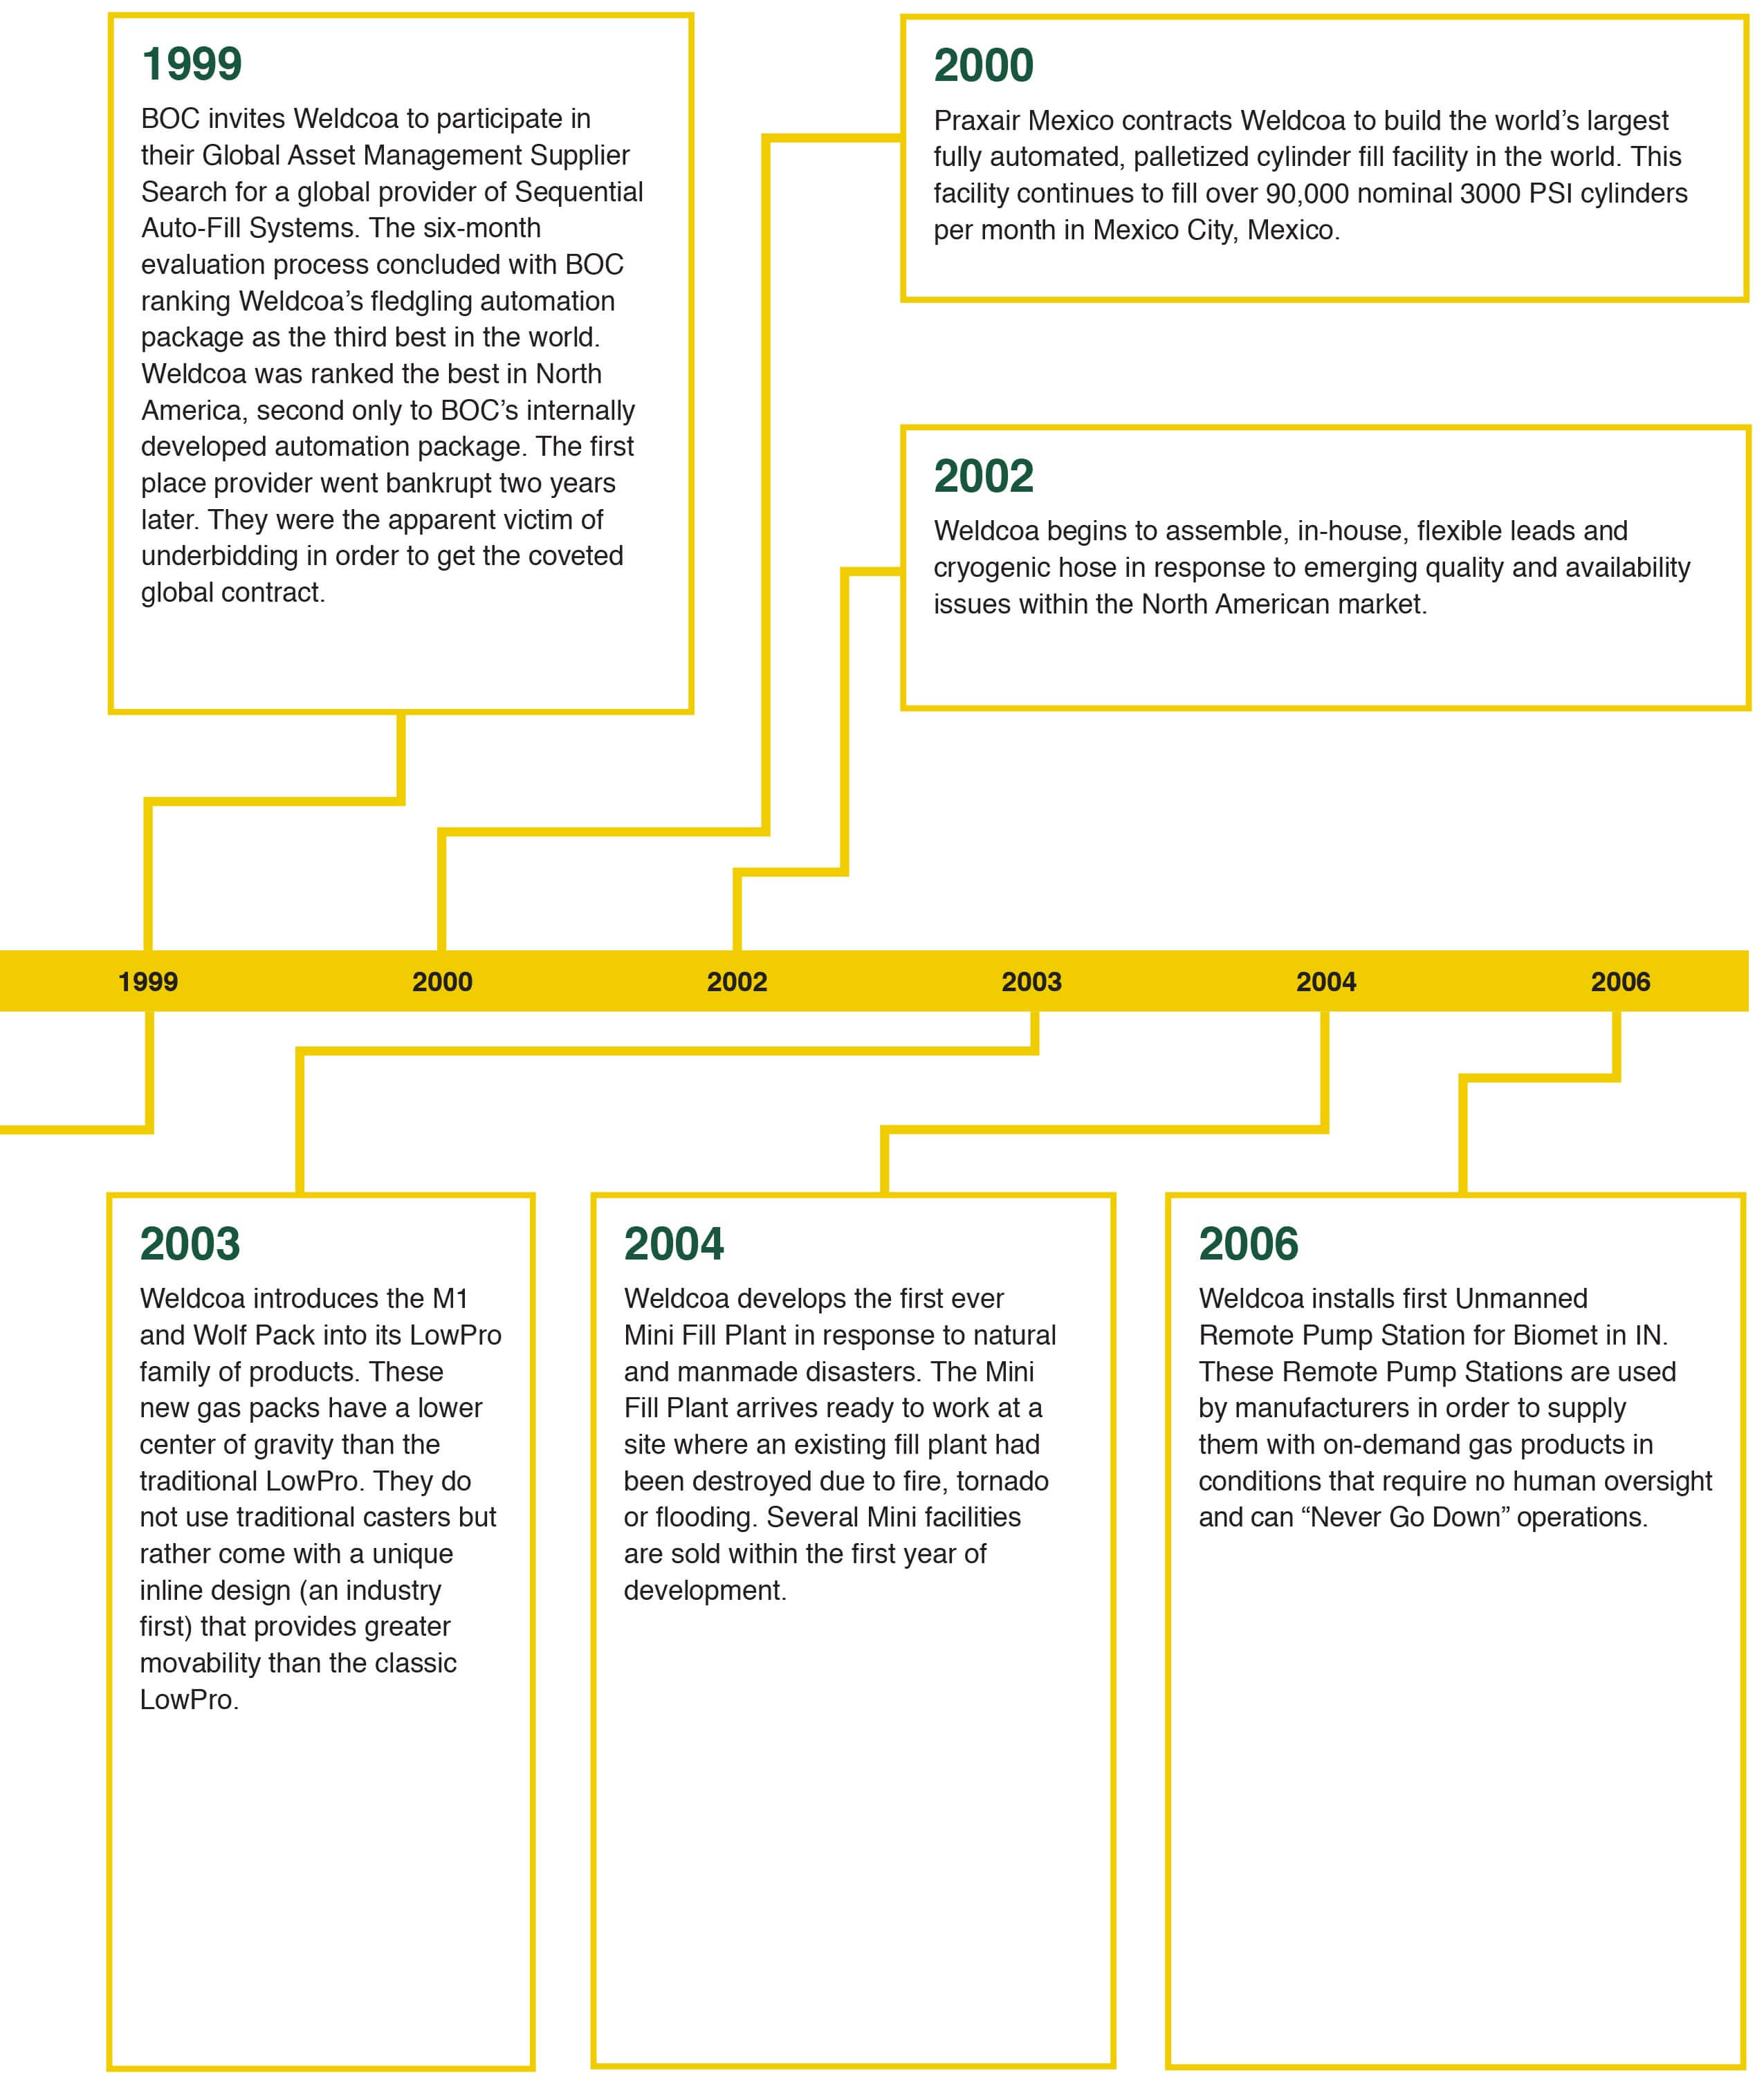 History of Firsts 1999-2006